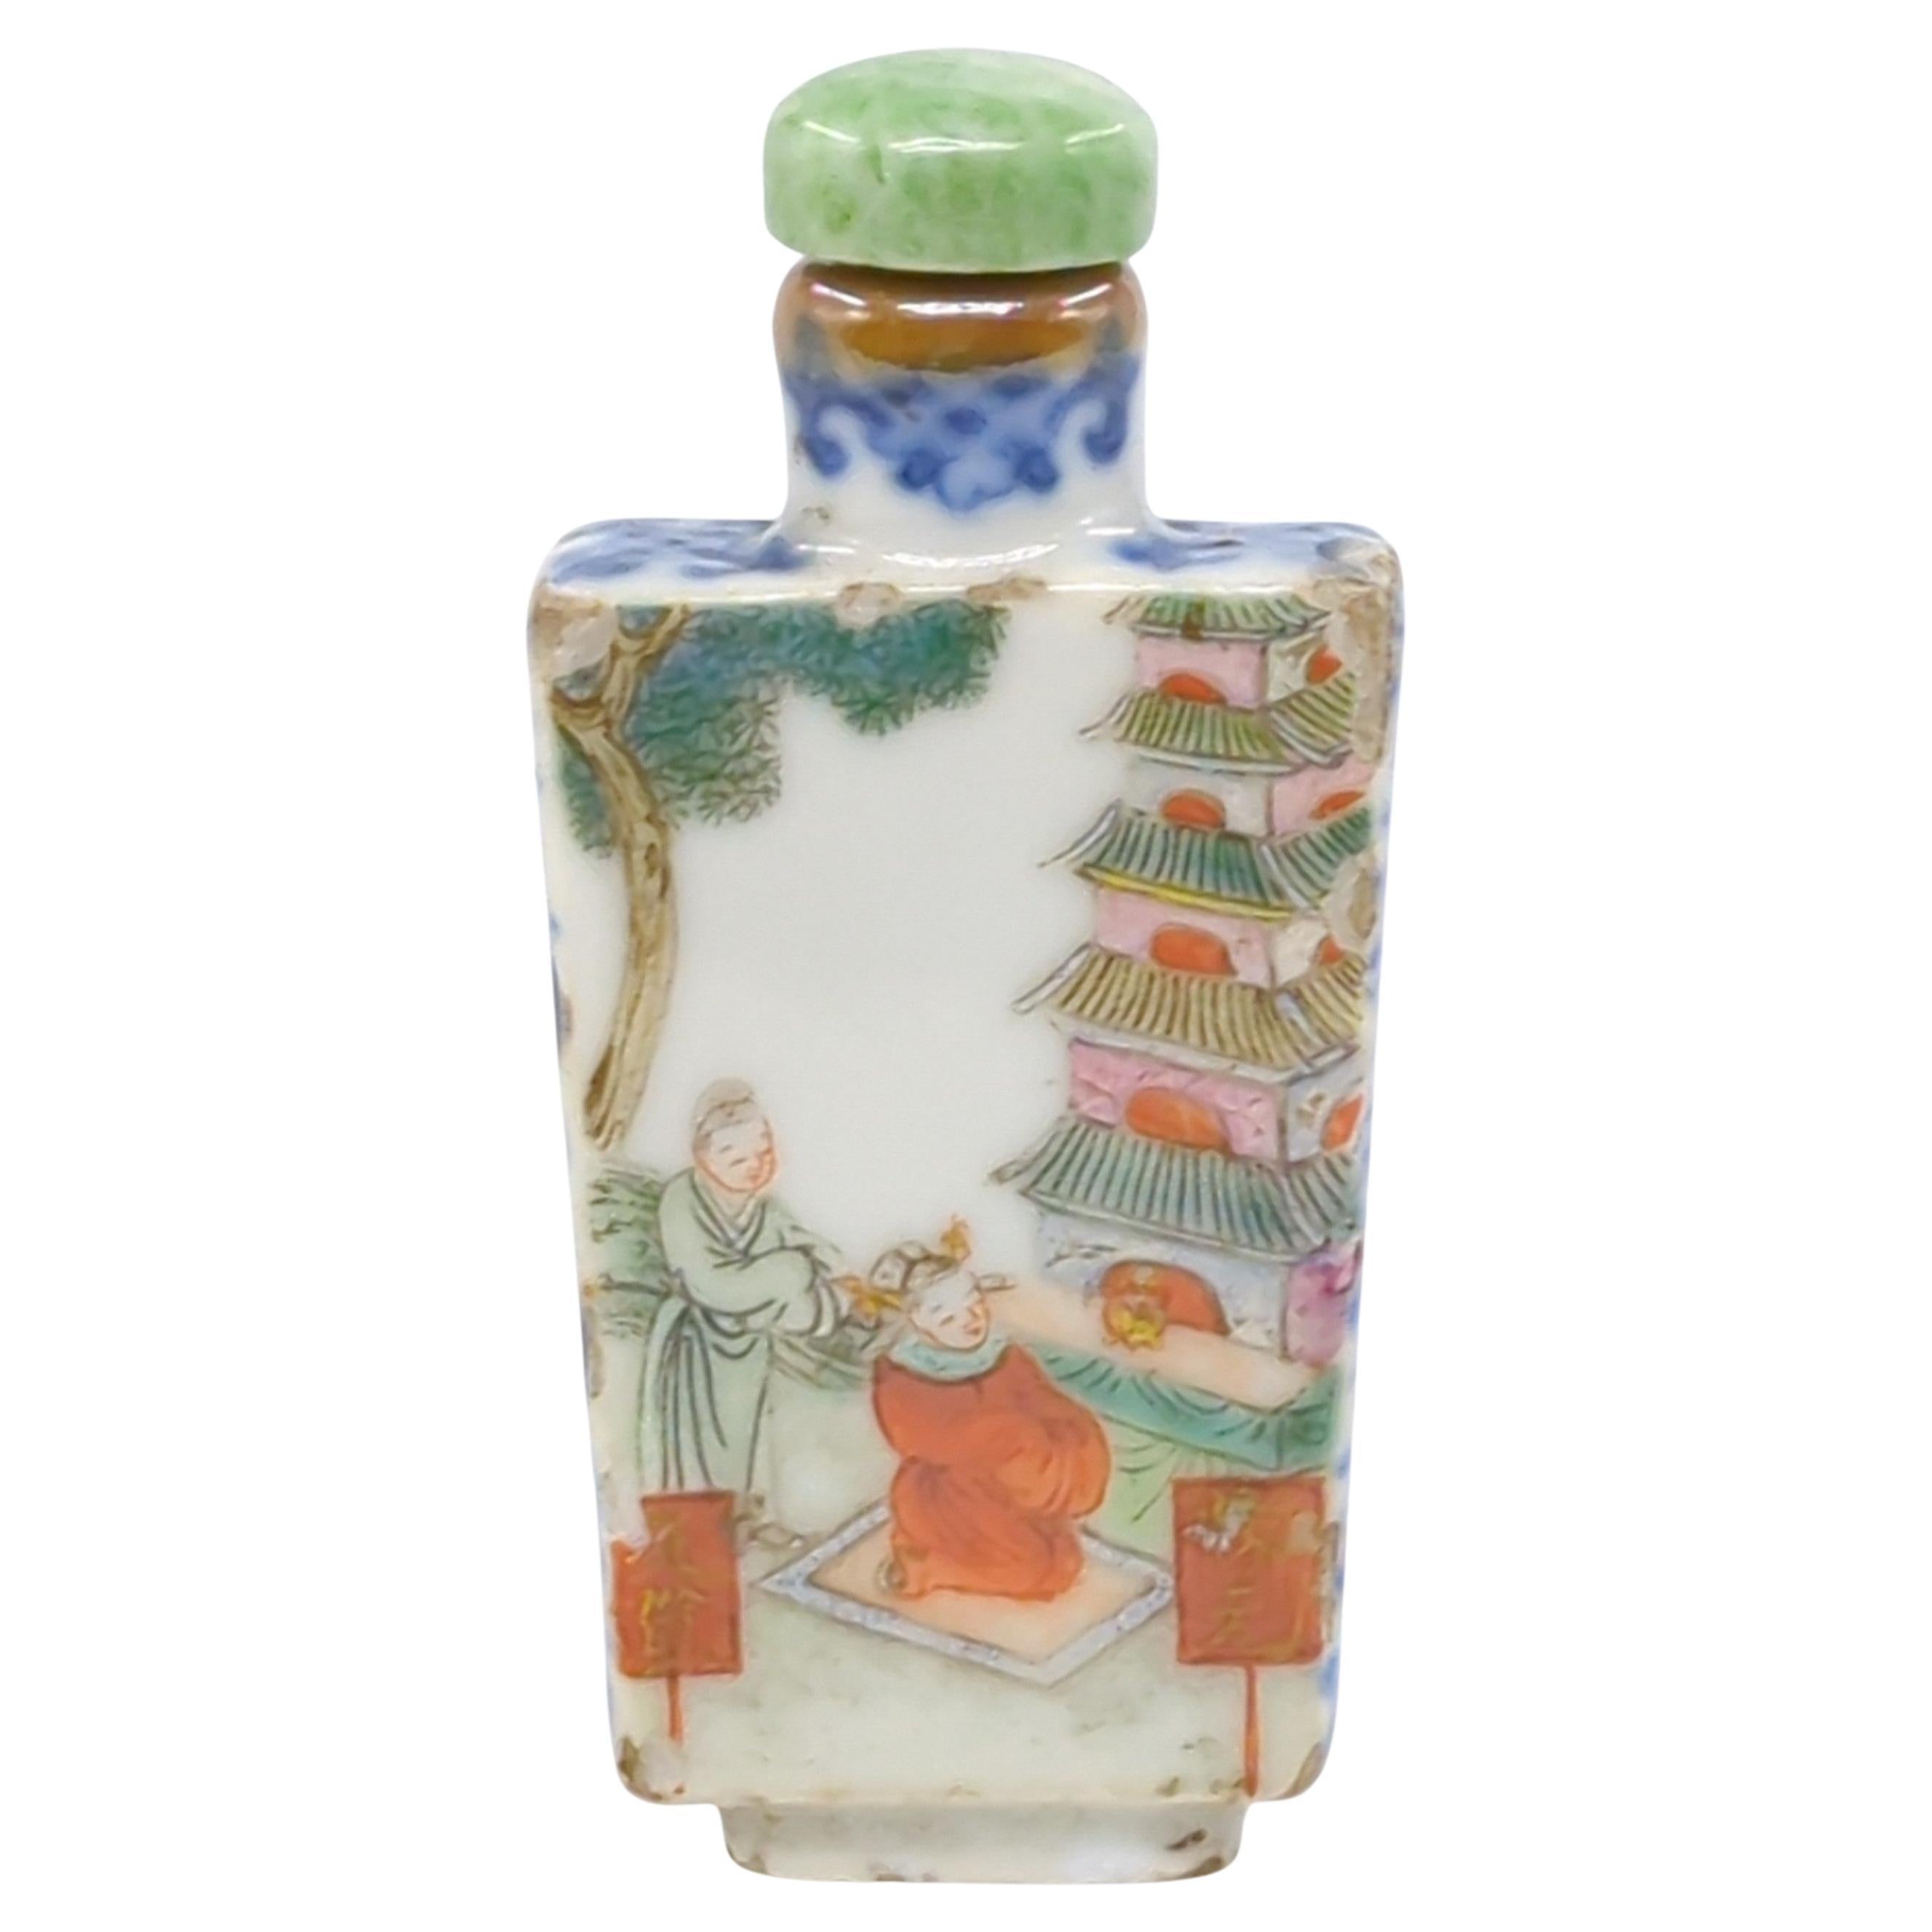 This fine Chinese porcelain snuff bottle from the Qing Dynasty's Jiaqing period  is of a tapered rectangular form, a shape that combines elegance with a sense of sturdiness.

The top and sides of the bottle are adorned with underglaze blue